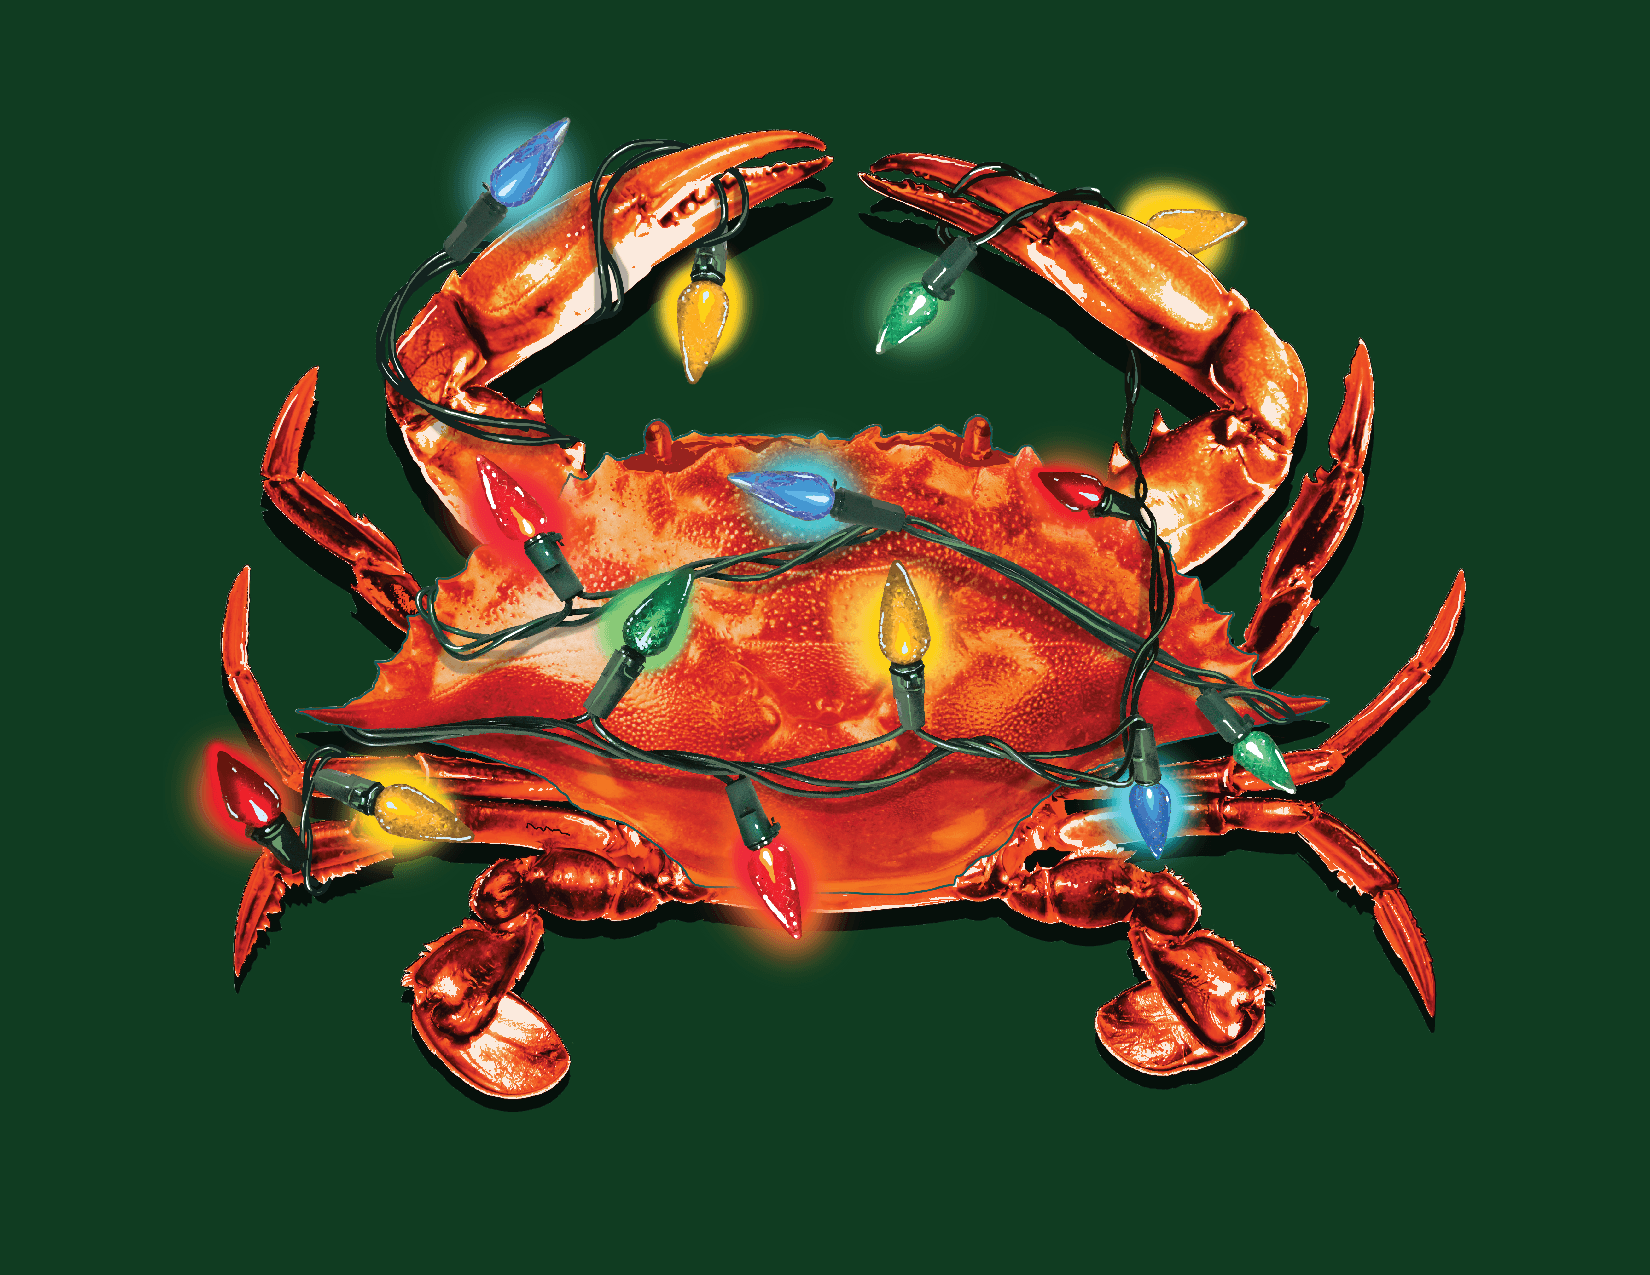 Crab Lights (Green) / 8-Pack Christmas Cards - Route One Apparel